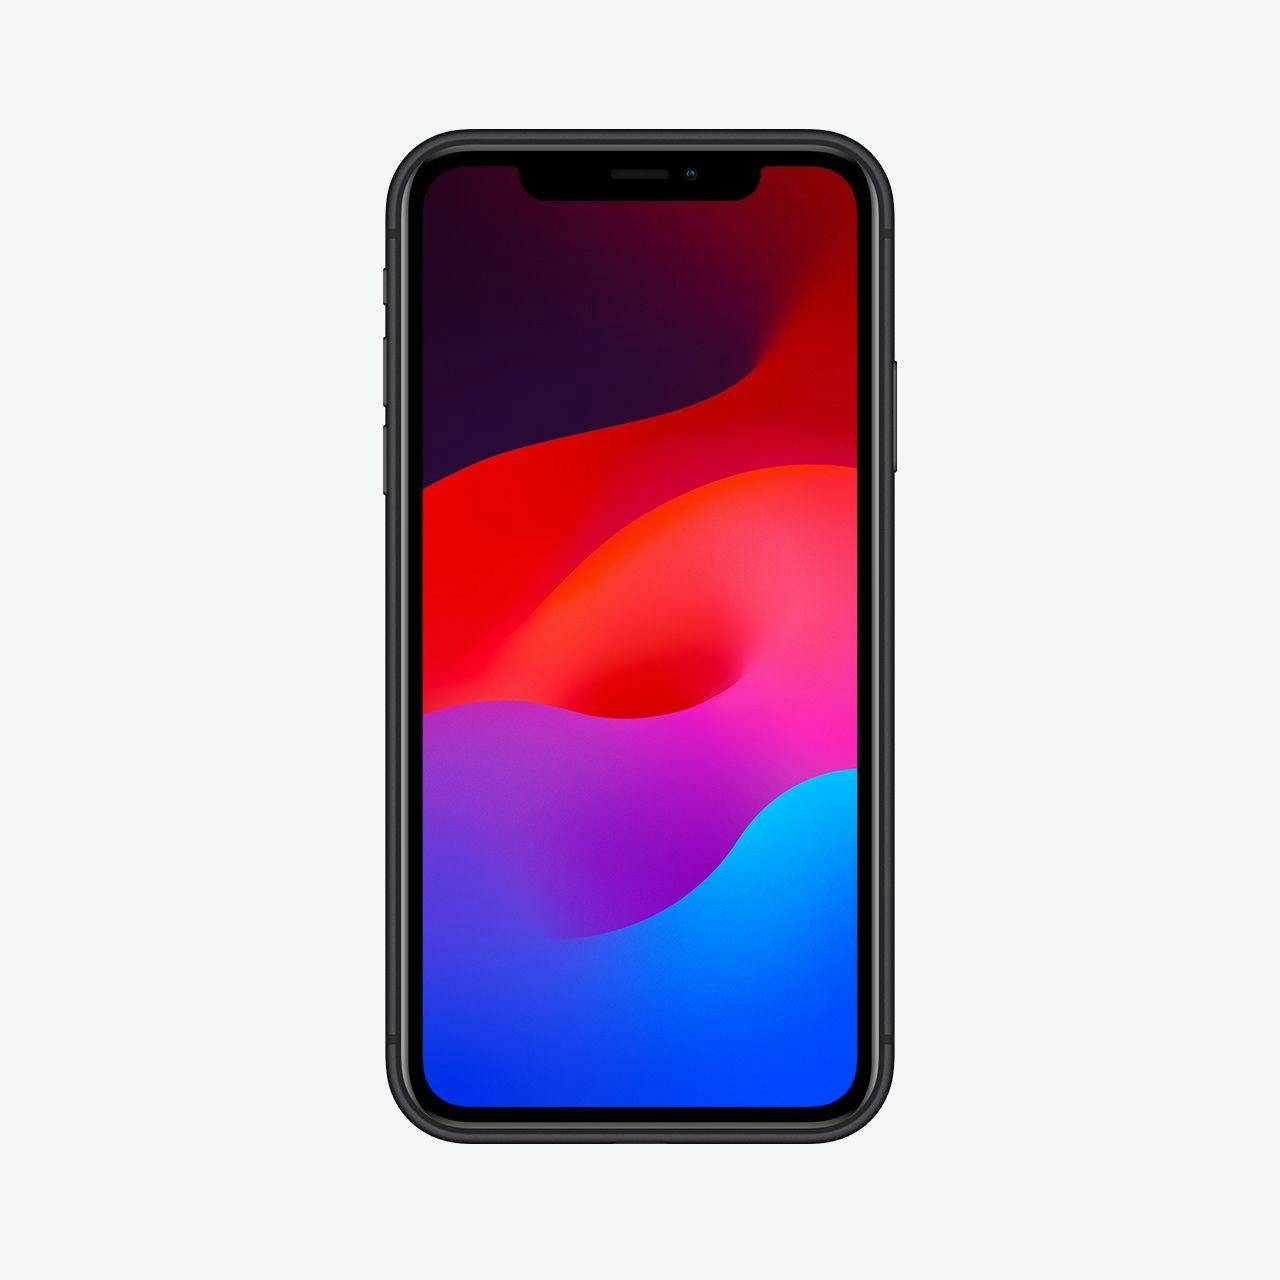 Image of iPhone XR.